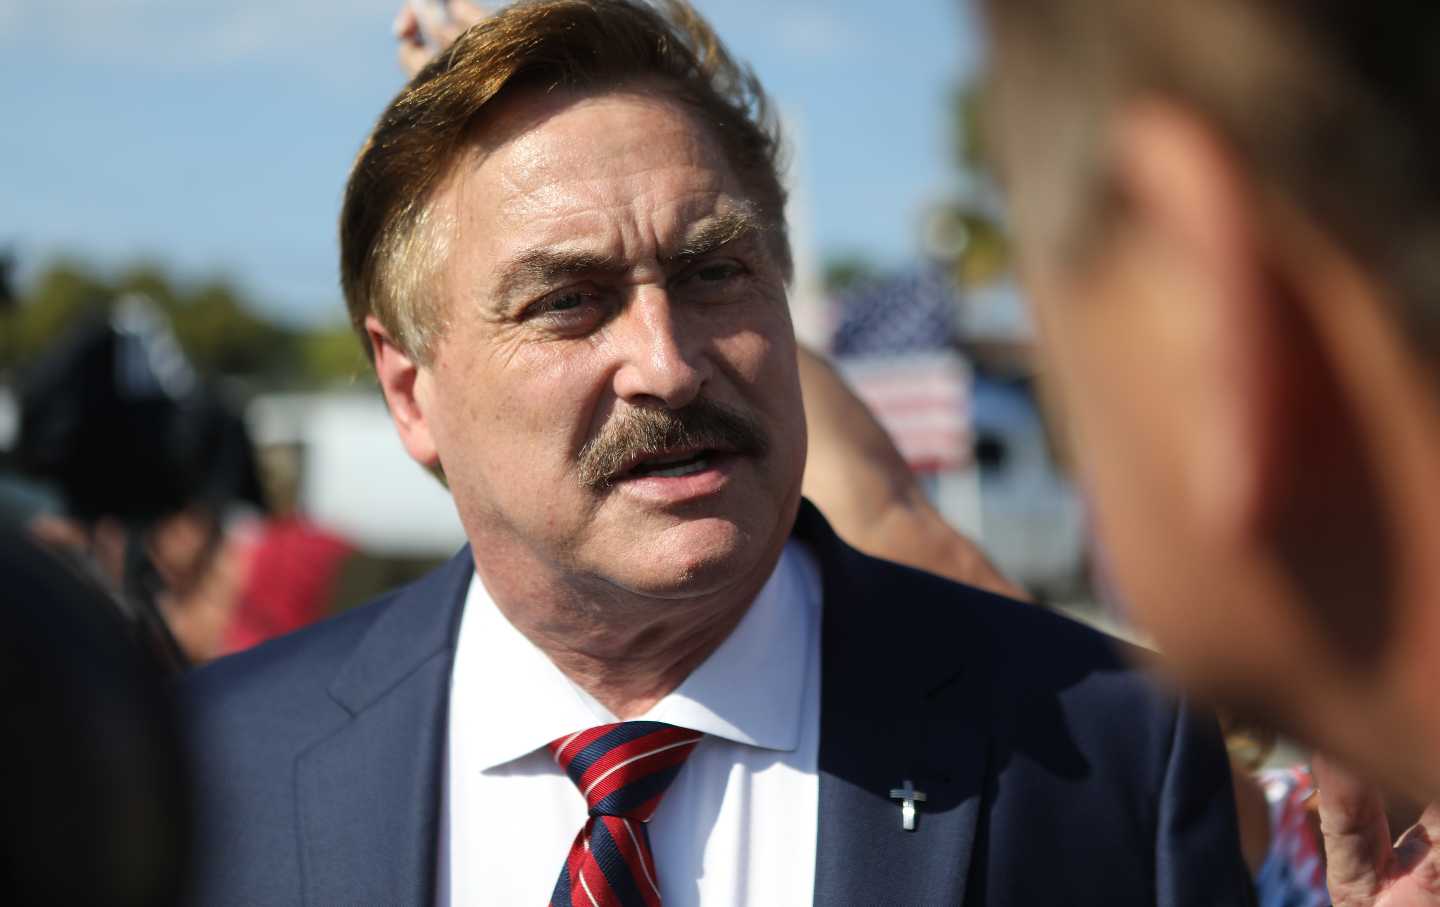 My Pillow CEO Mike Lindell arrives at a gathering of supporters of former US president Donald Trump.